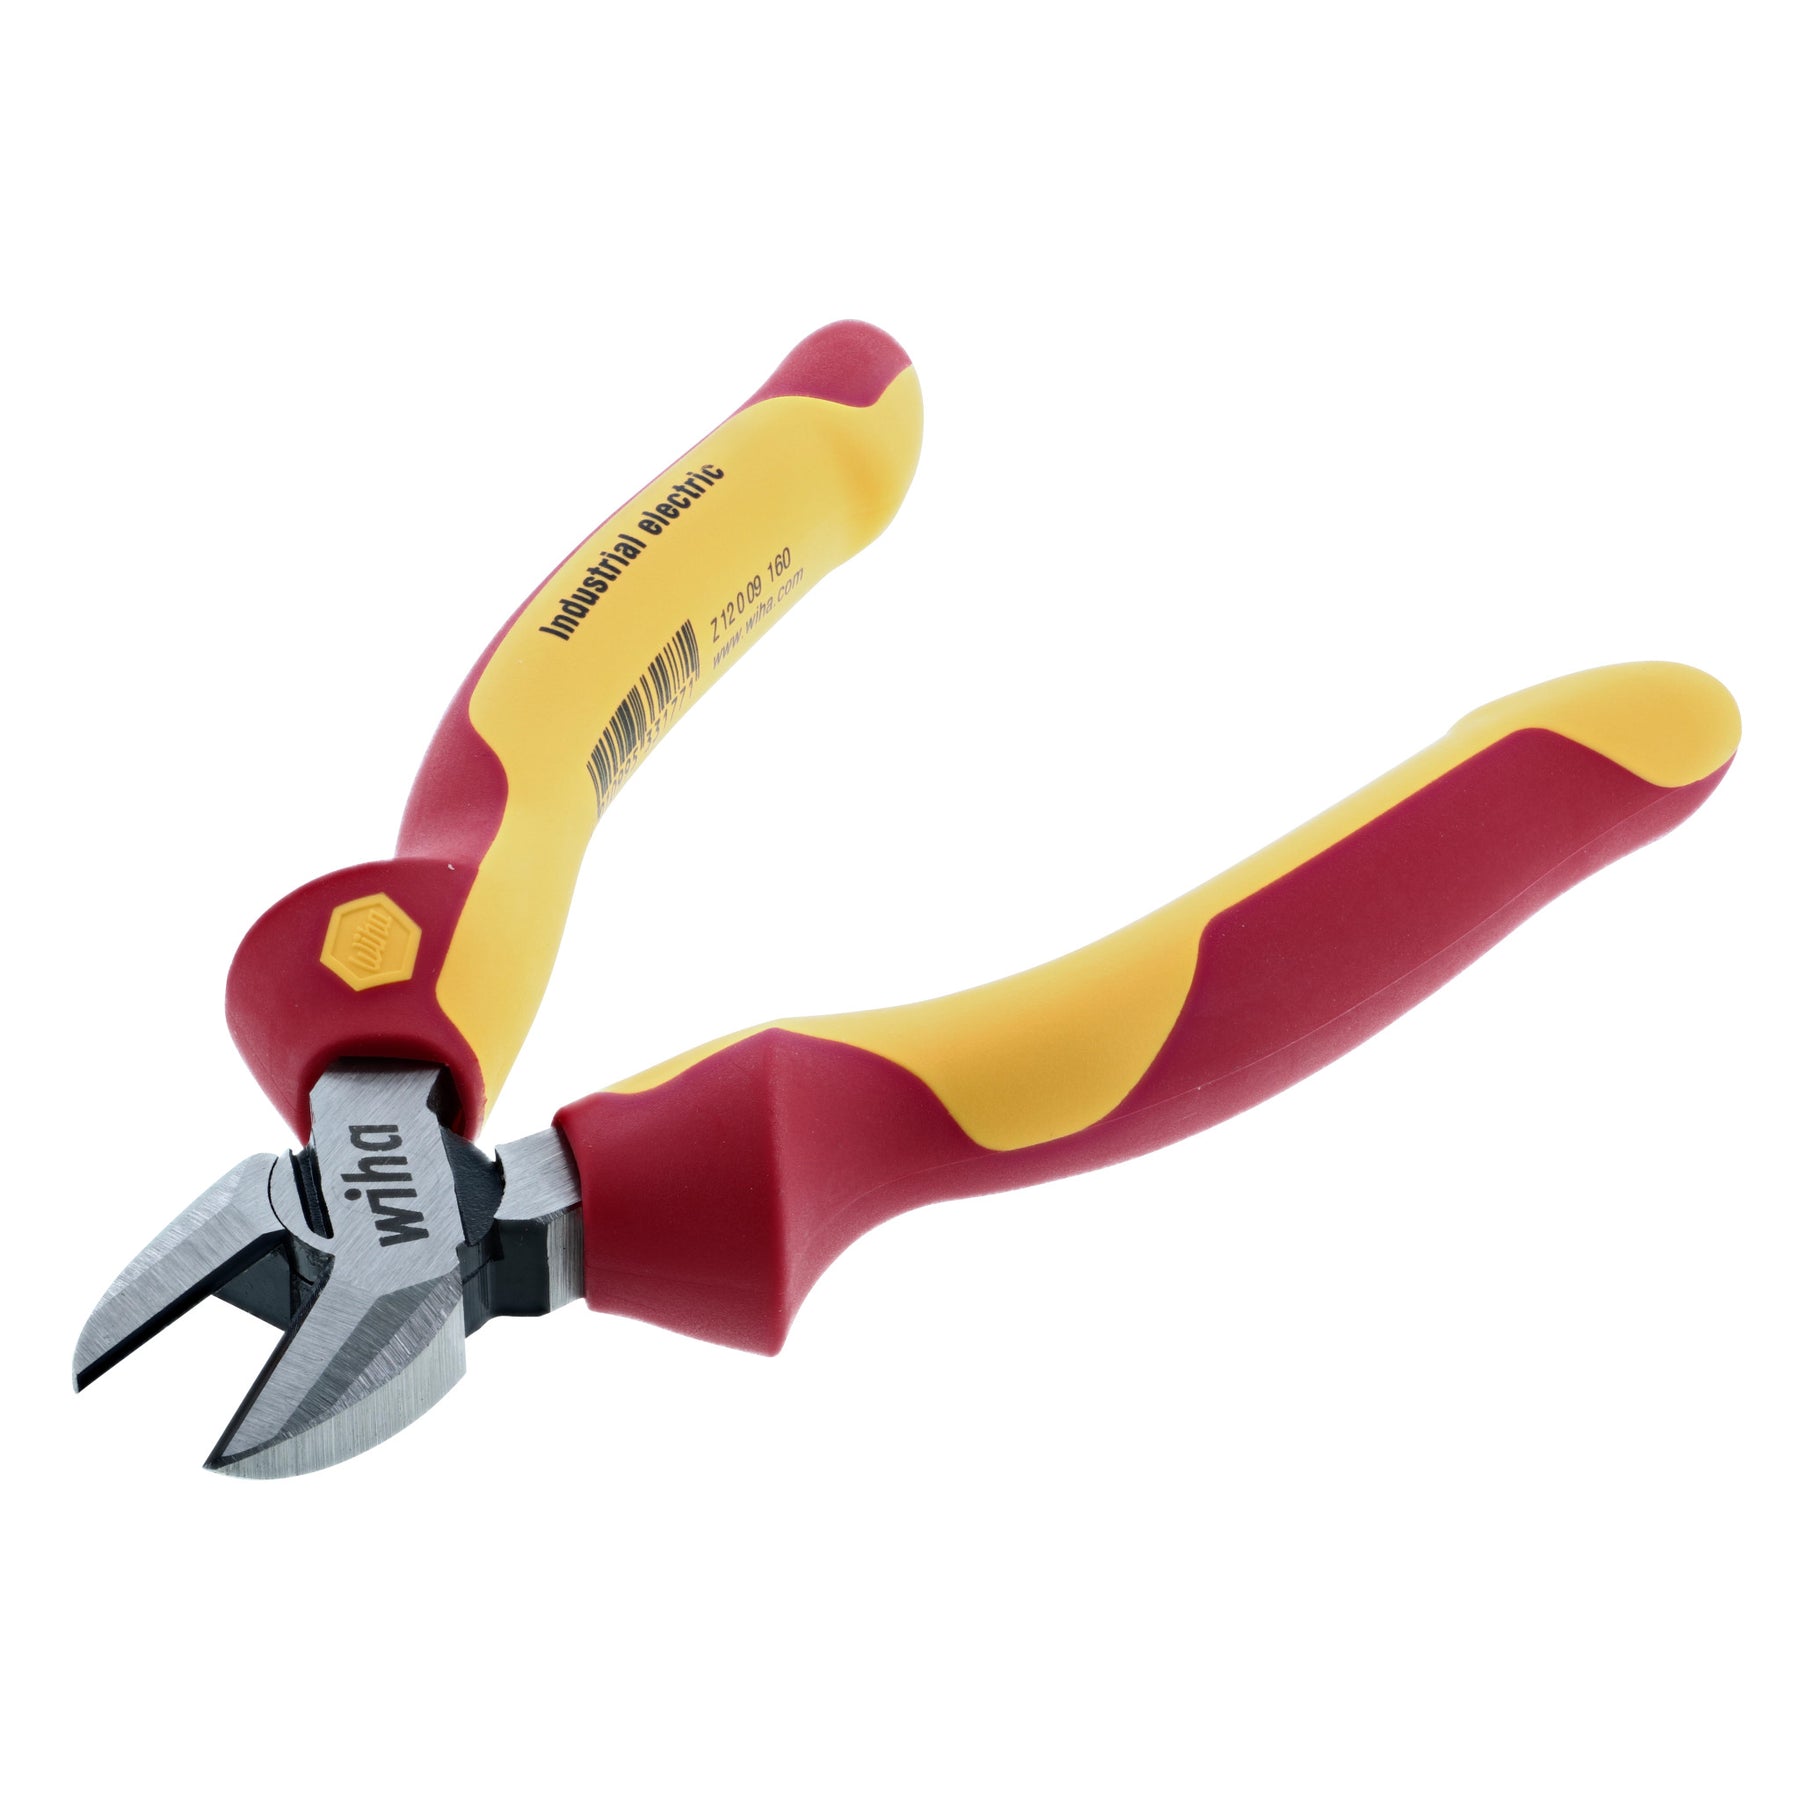 Insulated Industrial Diagonal Cutters 6.3"